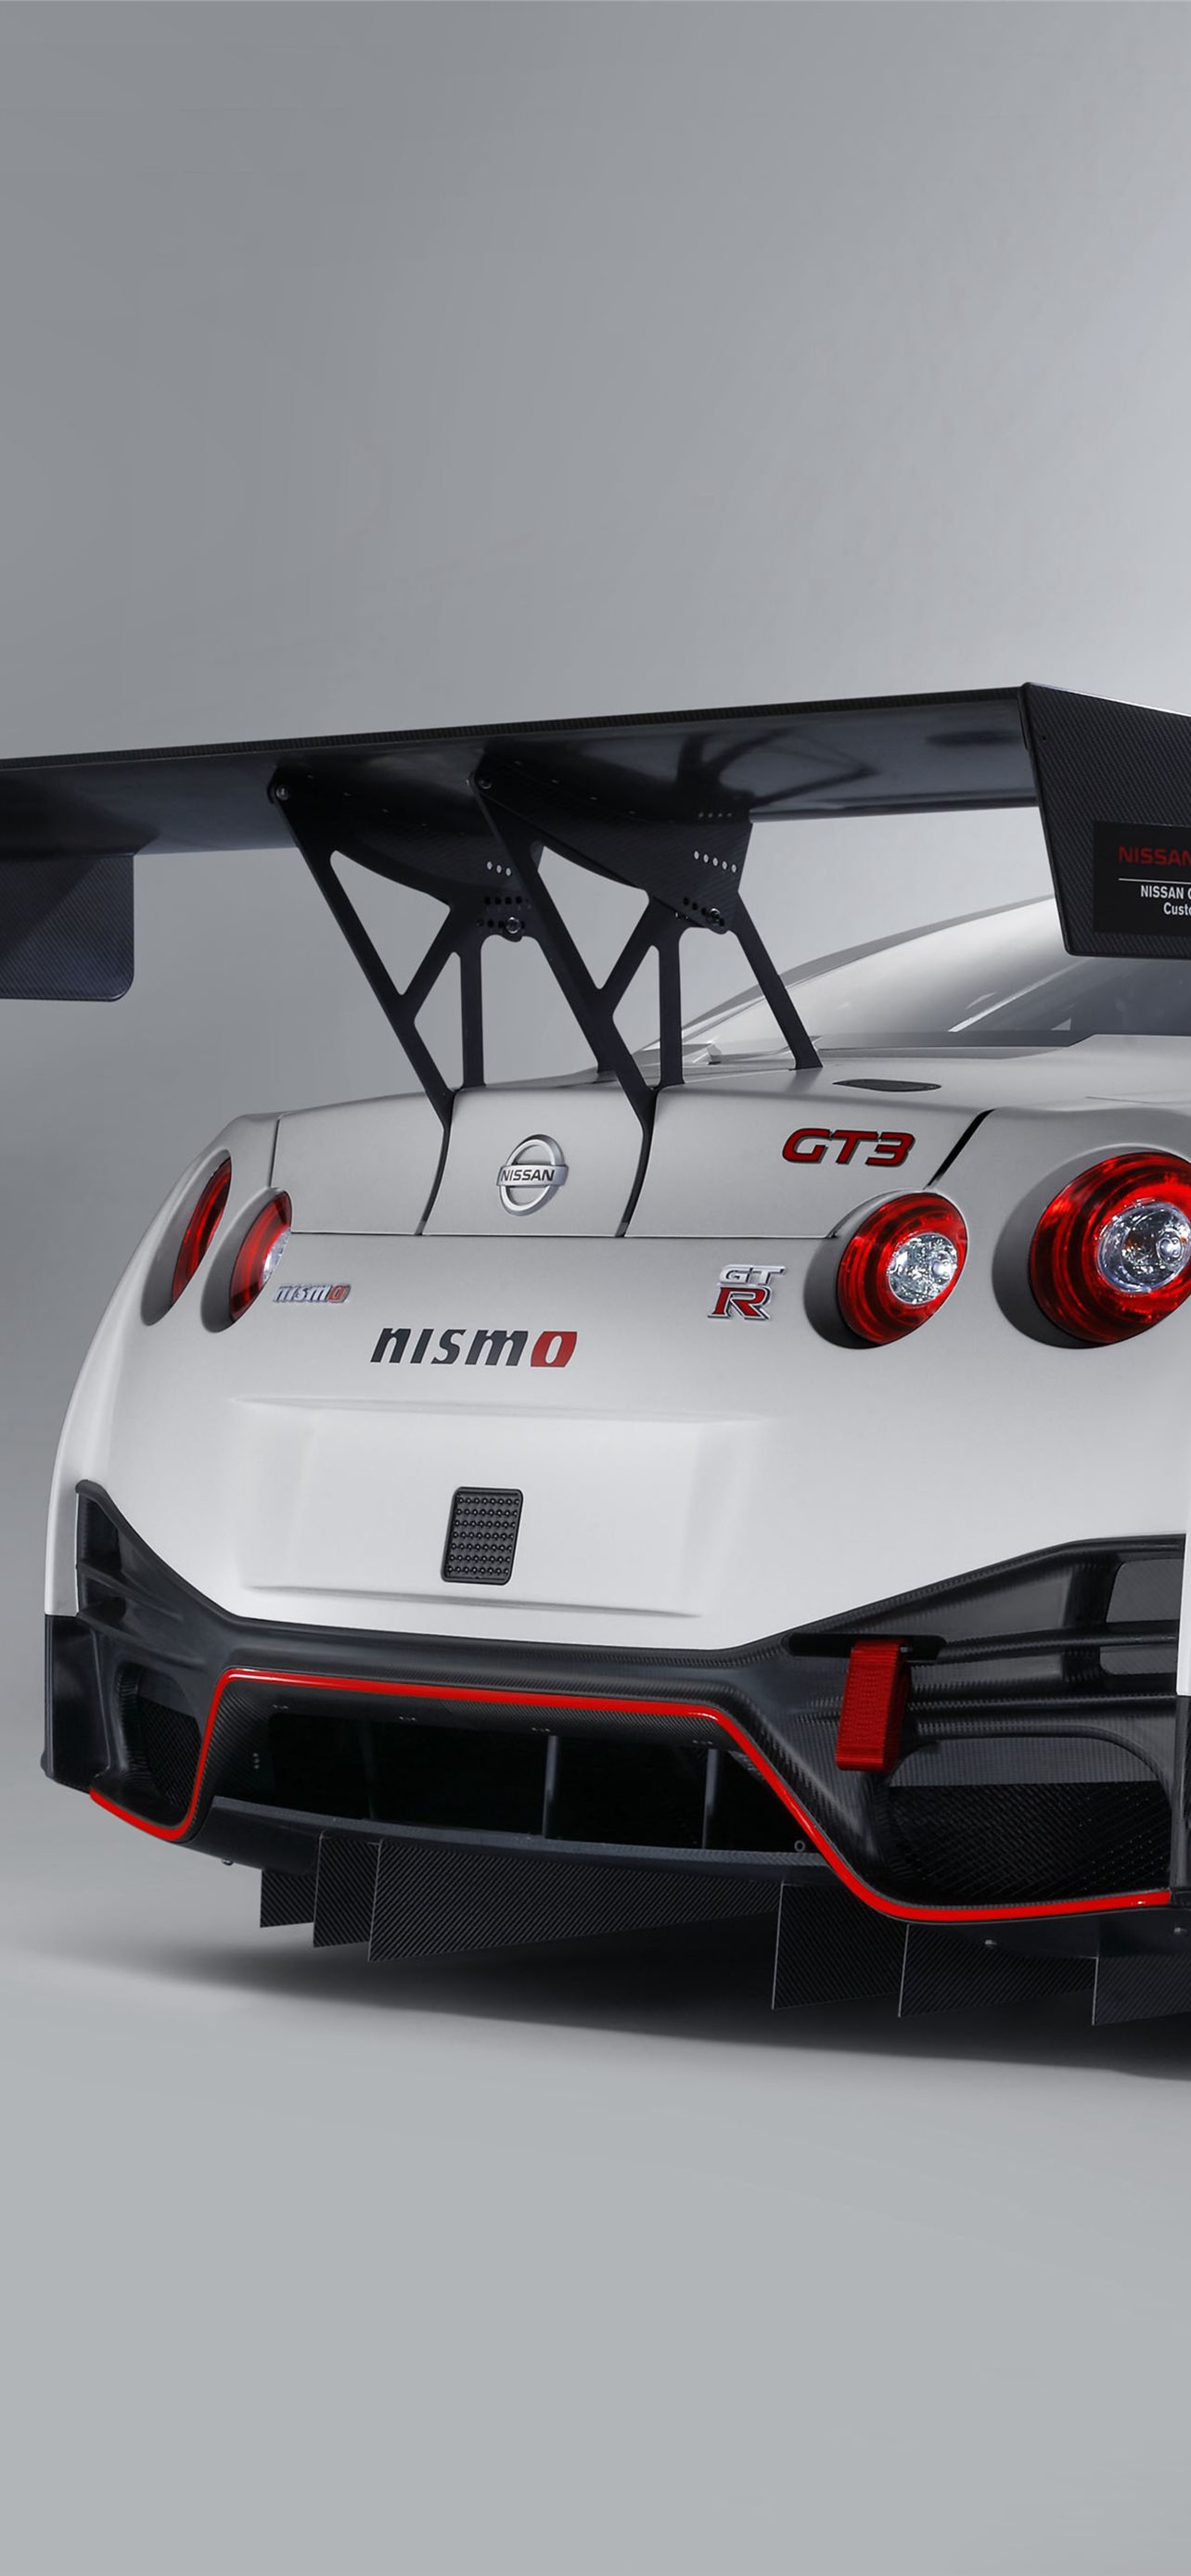 1284x2778 nissan gt r nismo iPhone Wallpapers Free Download